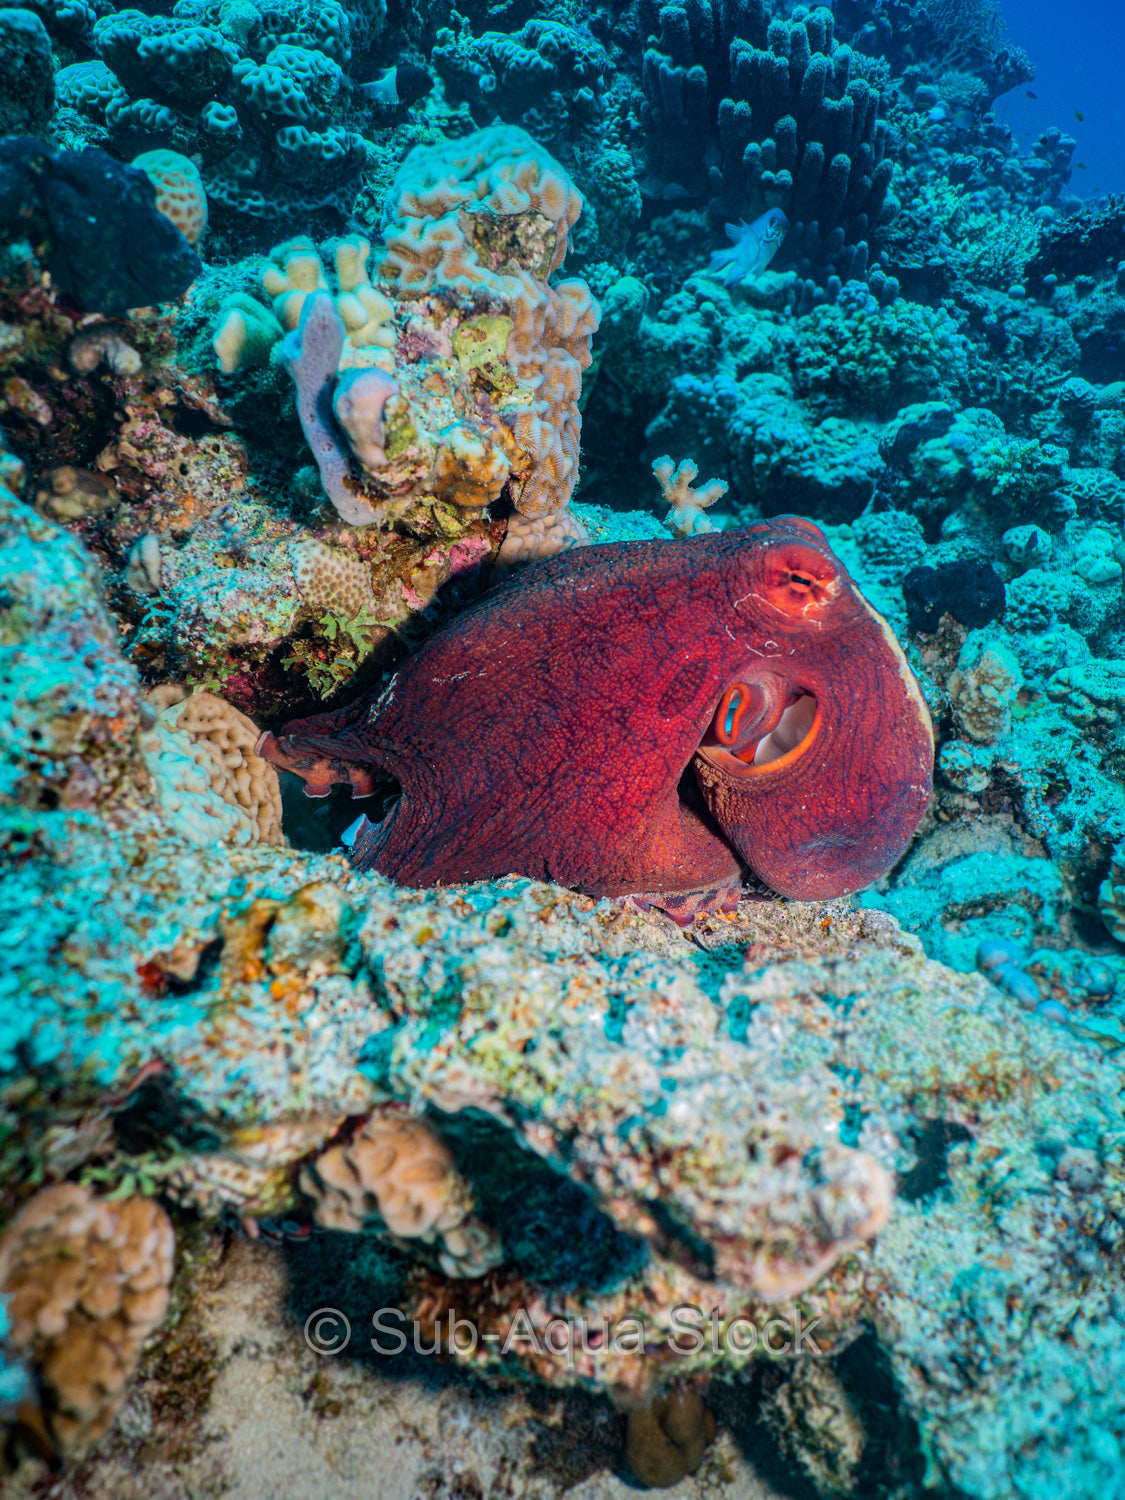 A day octopus (Octopus cyanea) emerges from it's hiding place in the Red Sea.